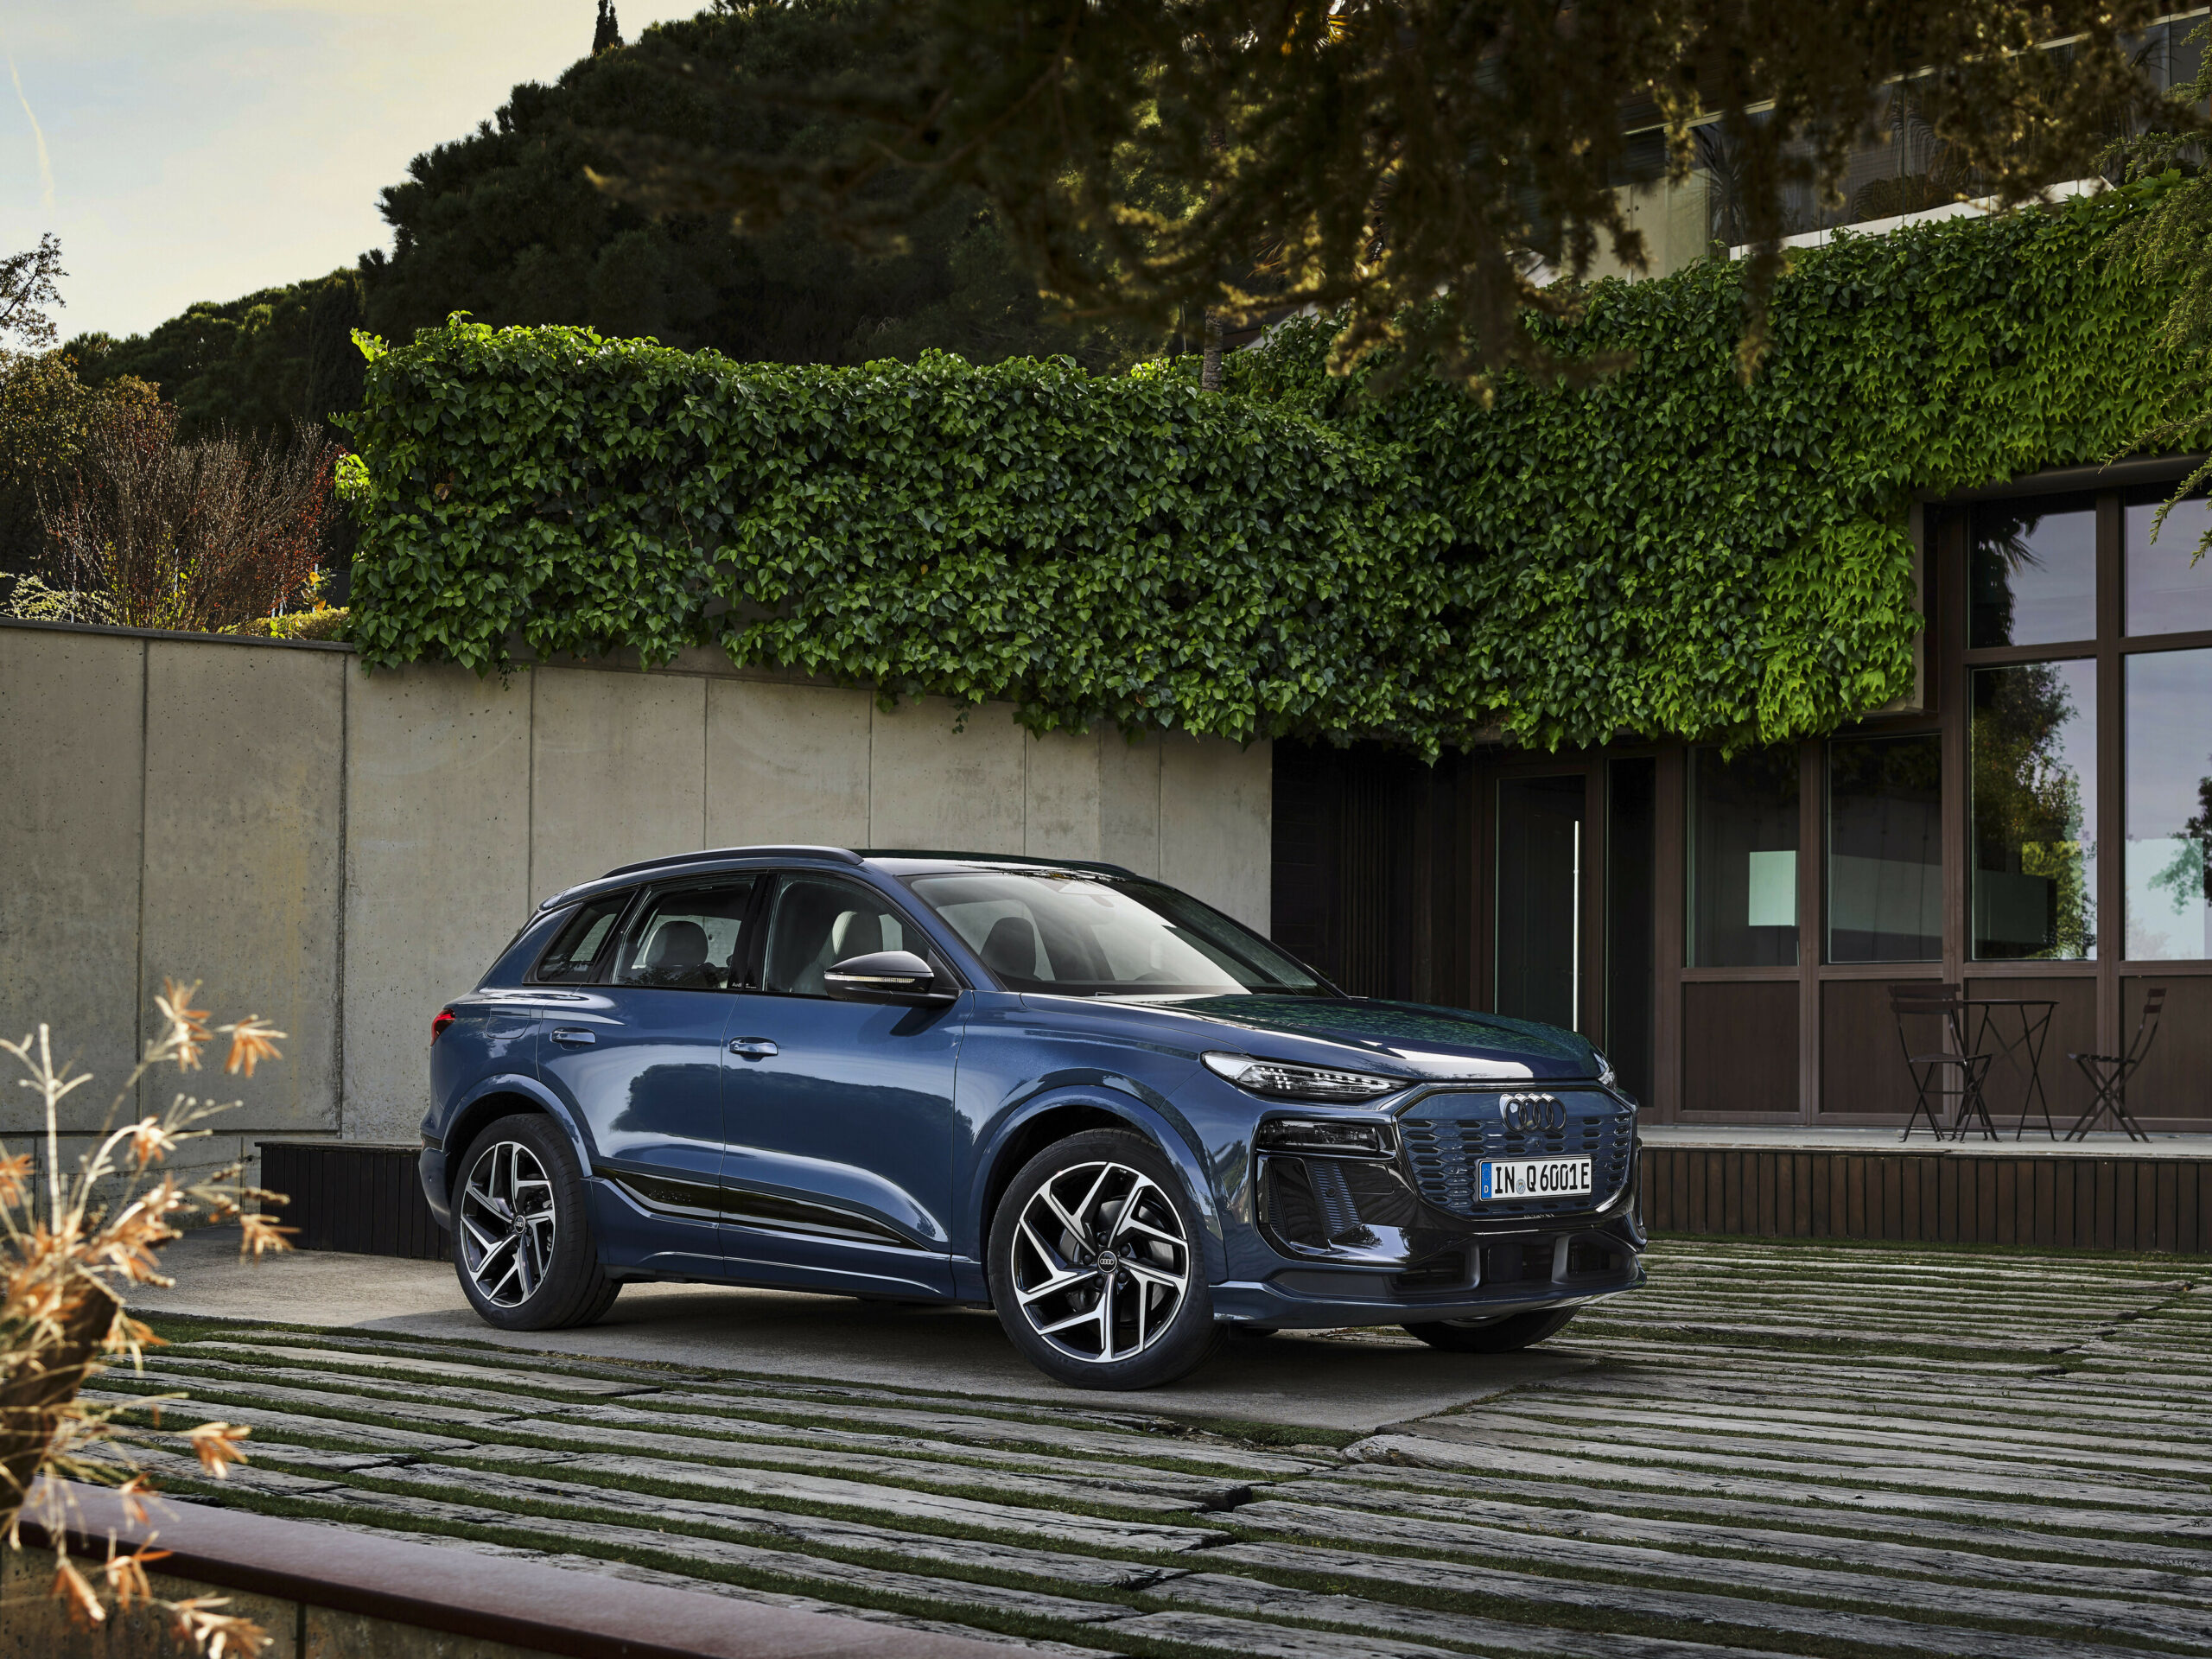 Audi Q6 e-tron is revealed, powered by a powerful electric motor .